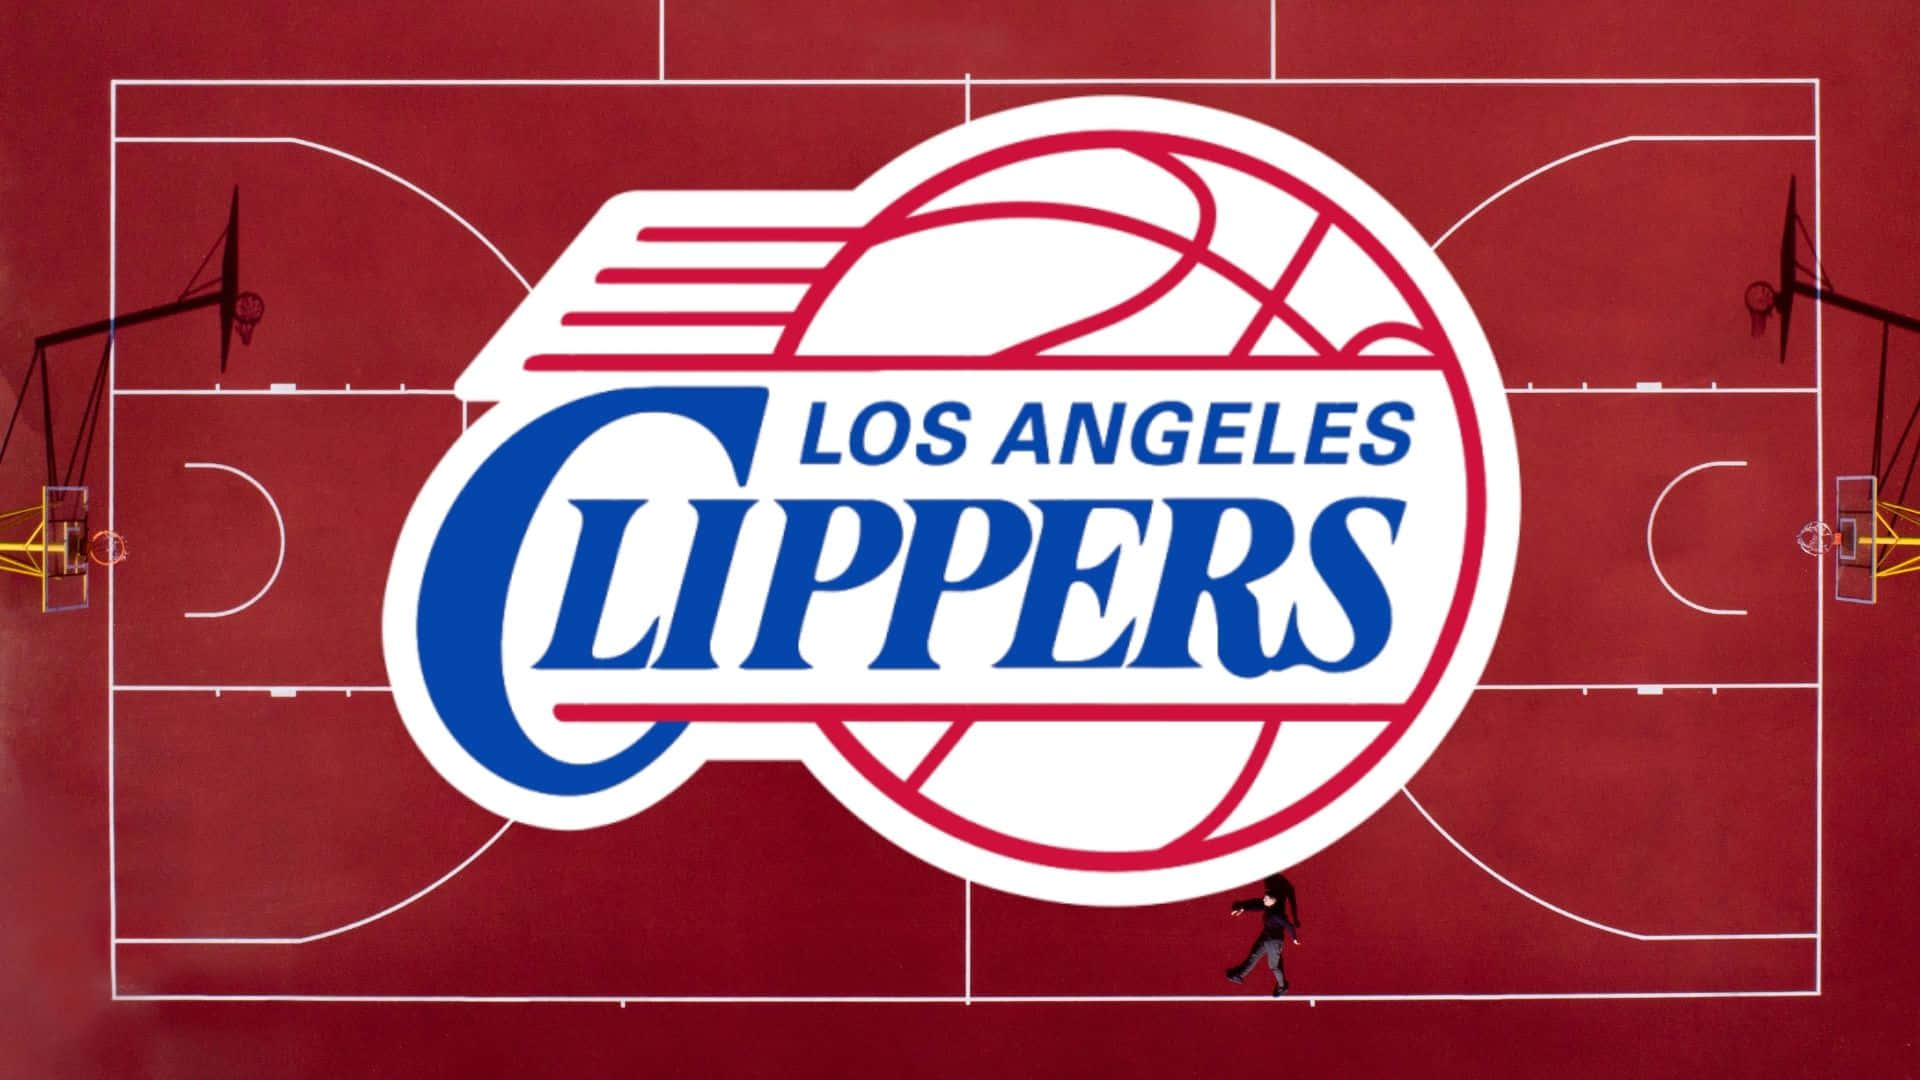 Clippers look determined to win it all Wallpaper